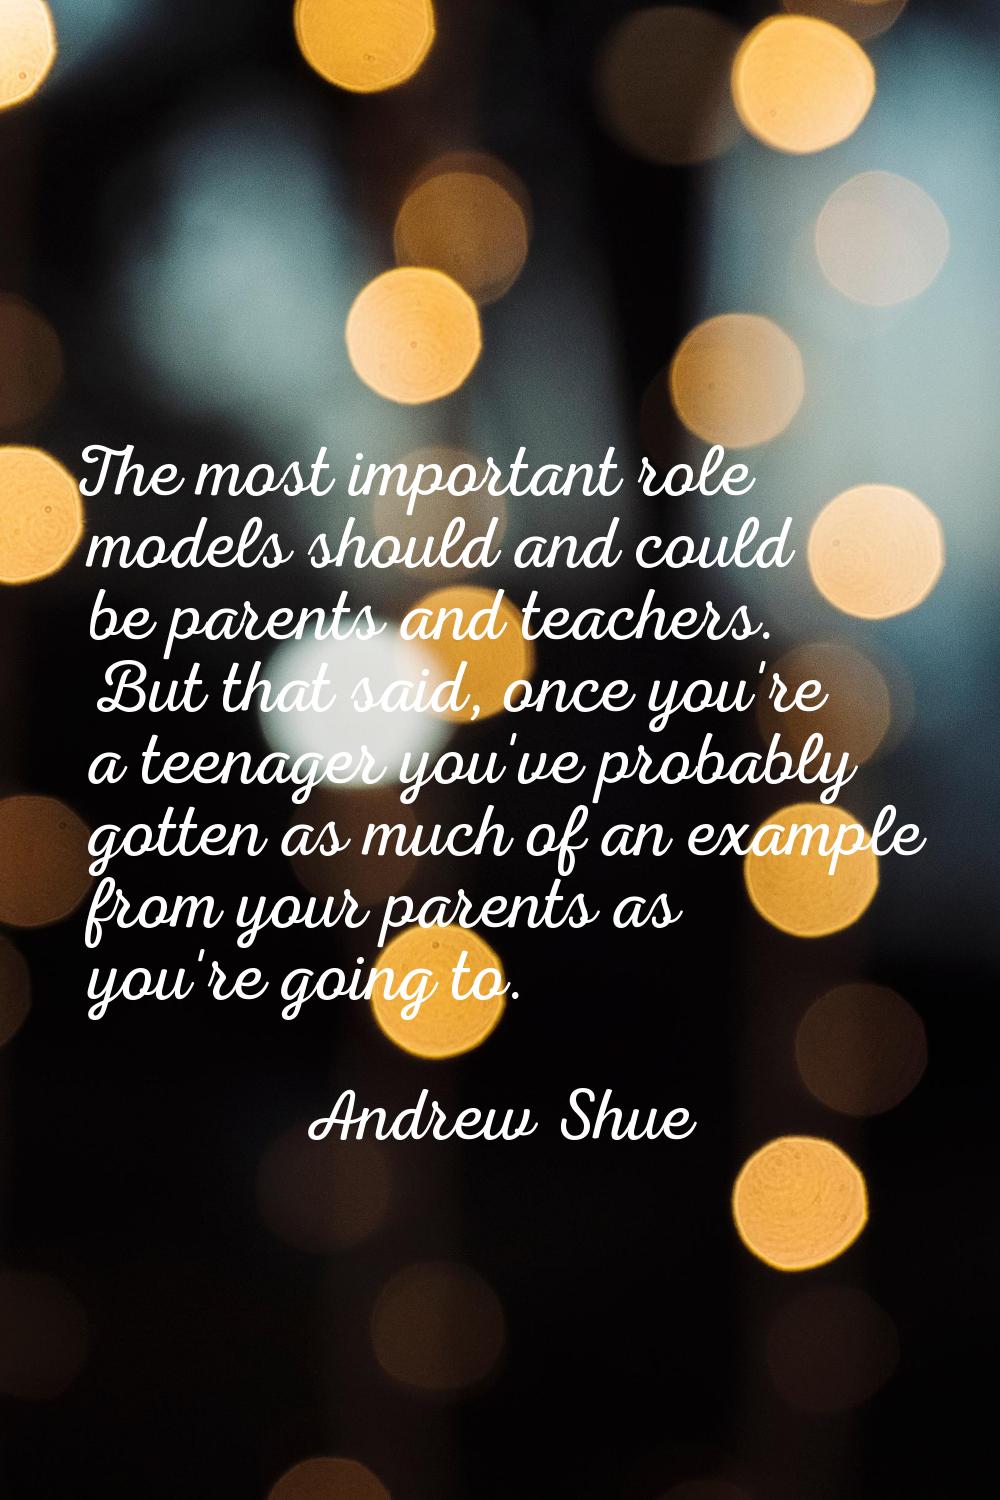 The most important role models should and could be parents and teachers. But that said, once you're